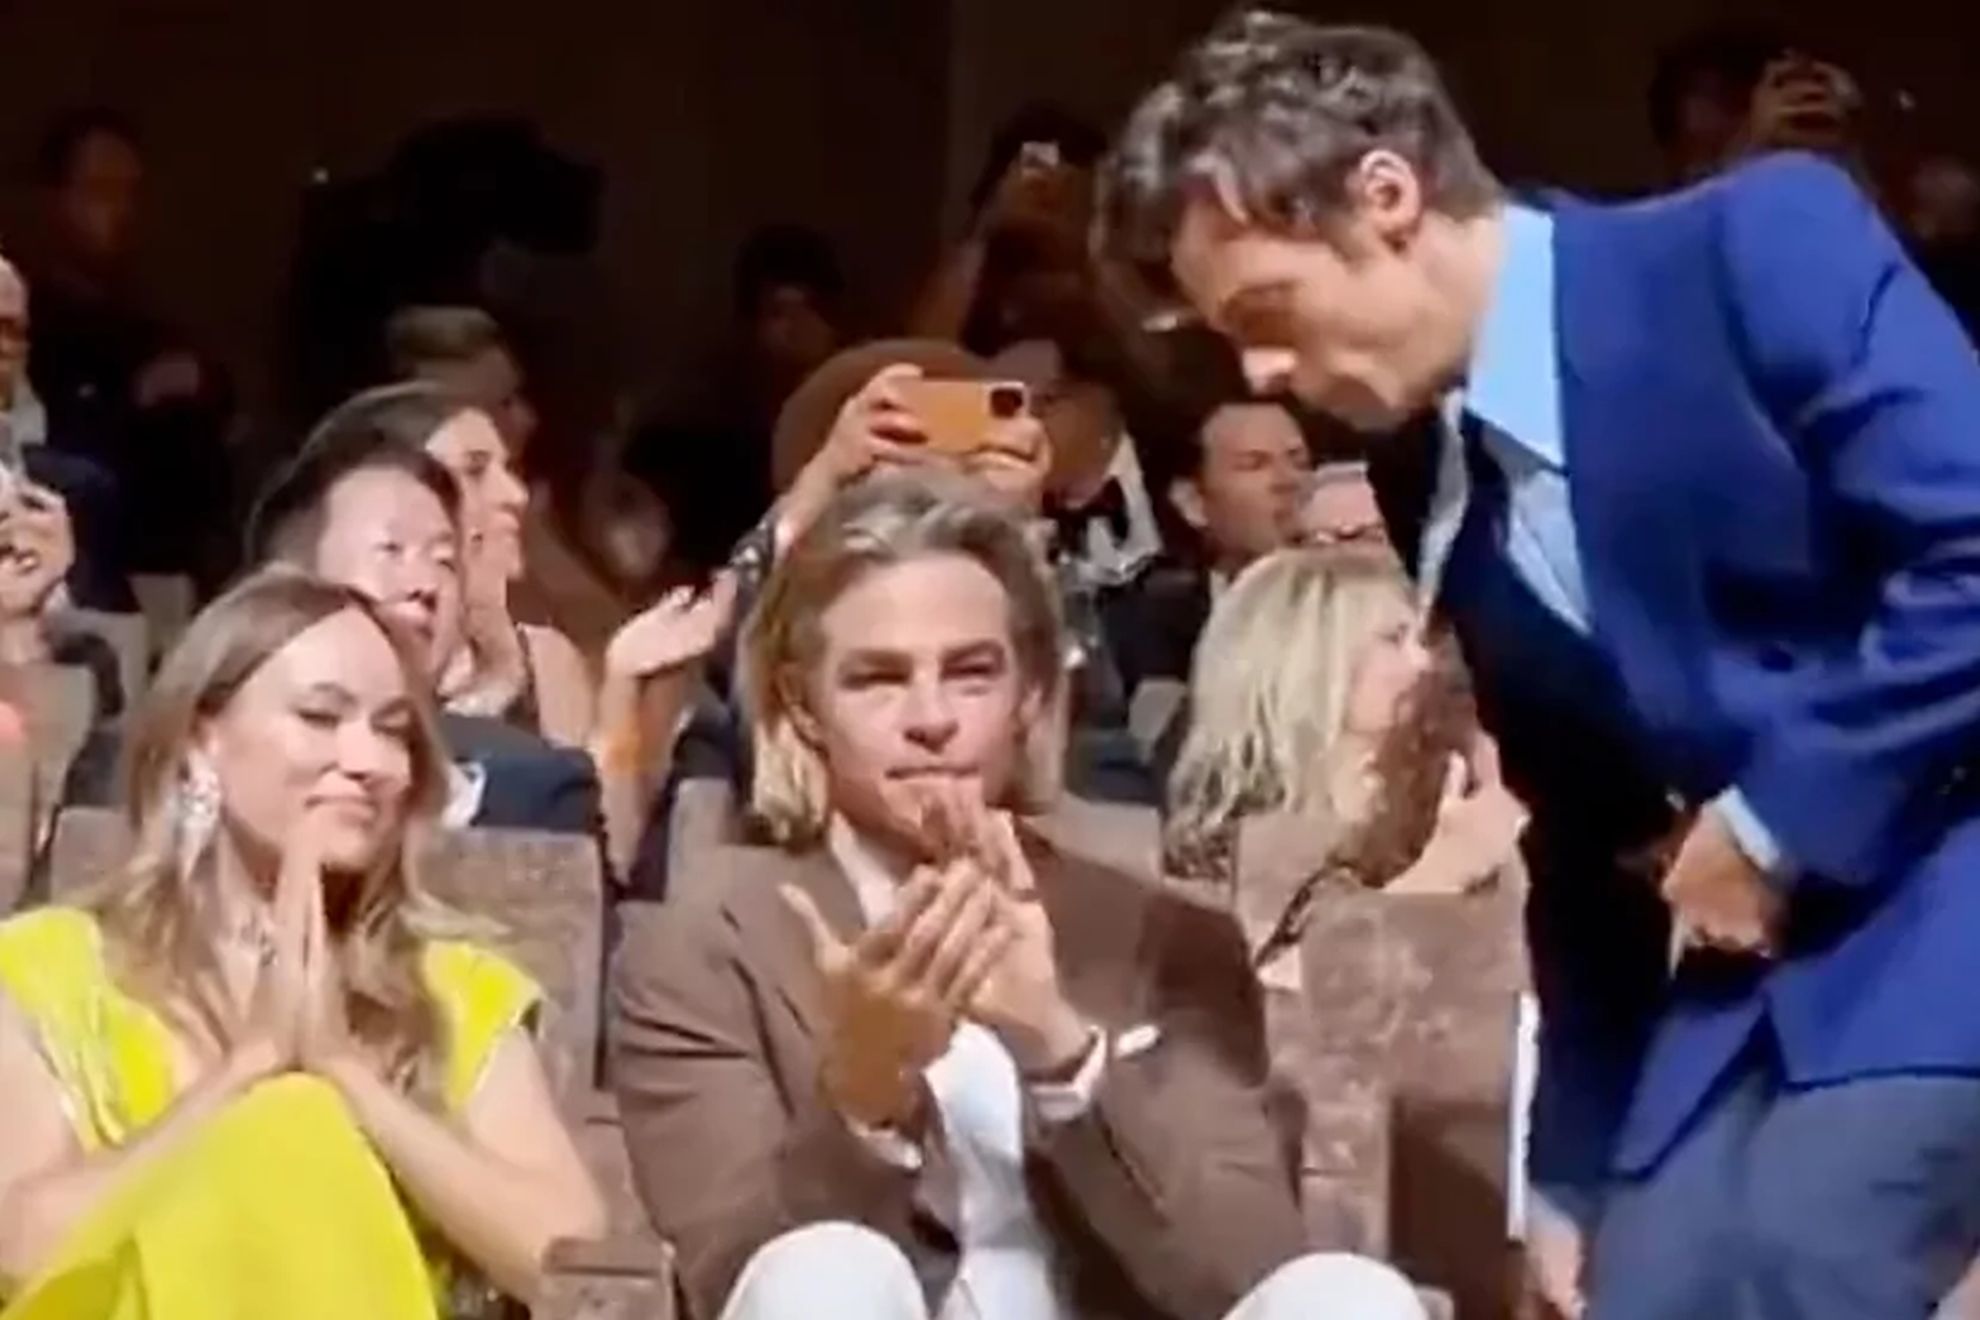 The video that shows Harry Styles spitting on actor Chris Pine at the Venice Film Festival